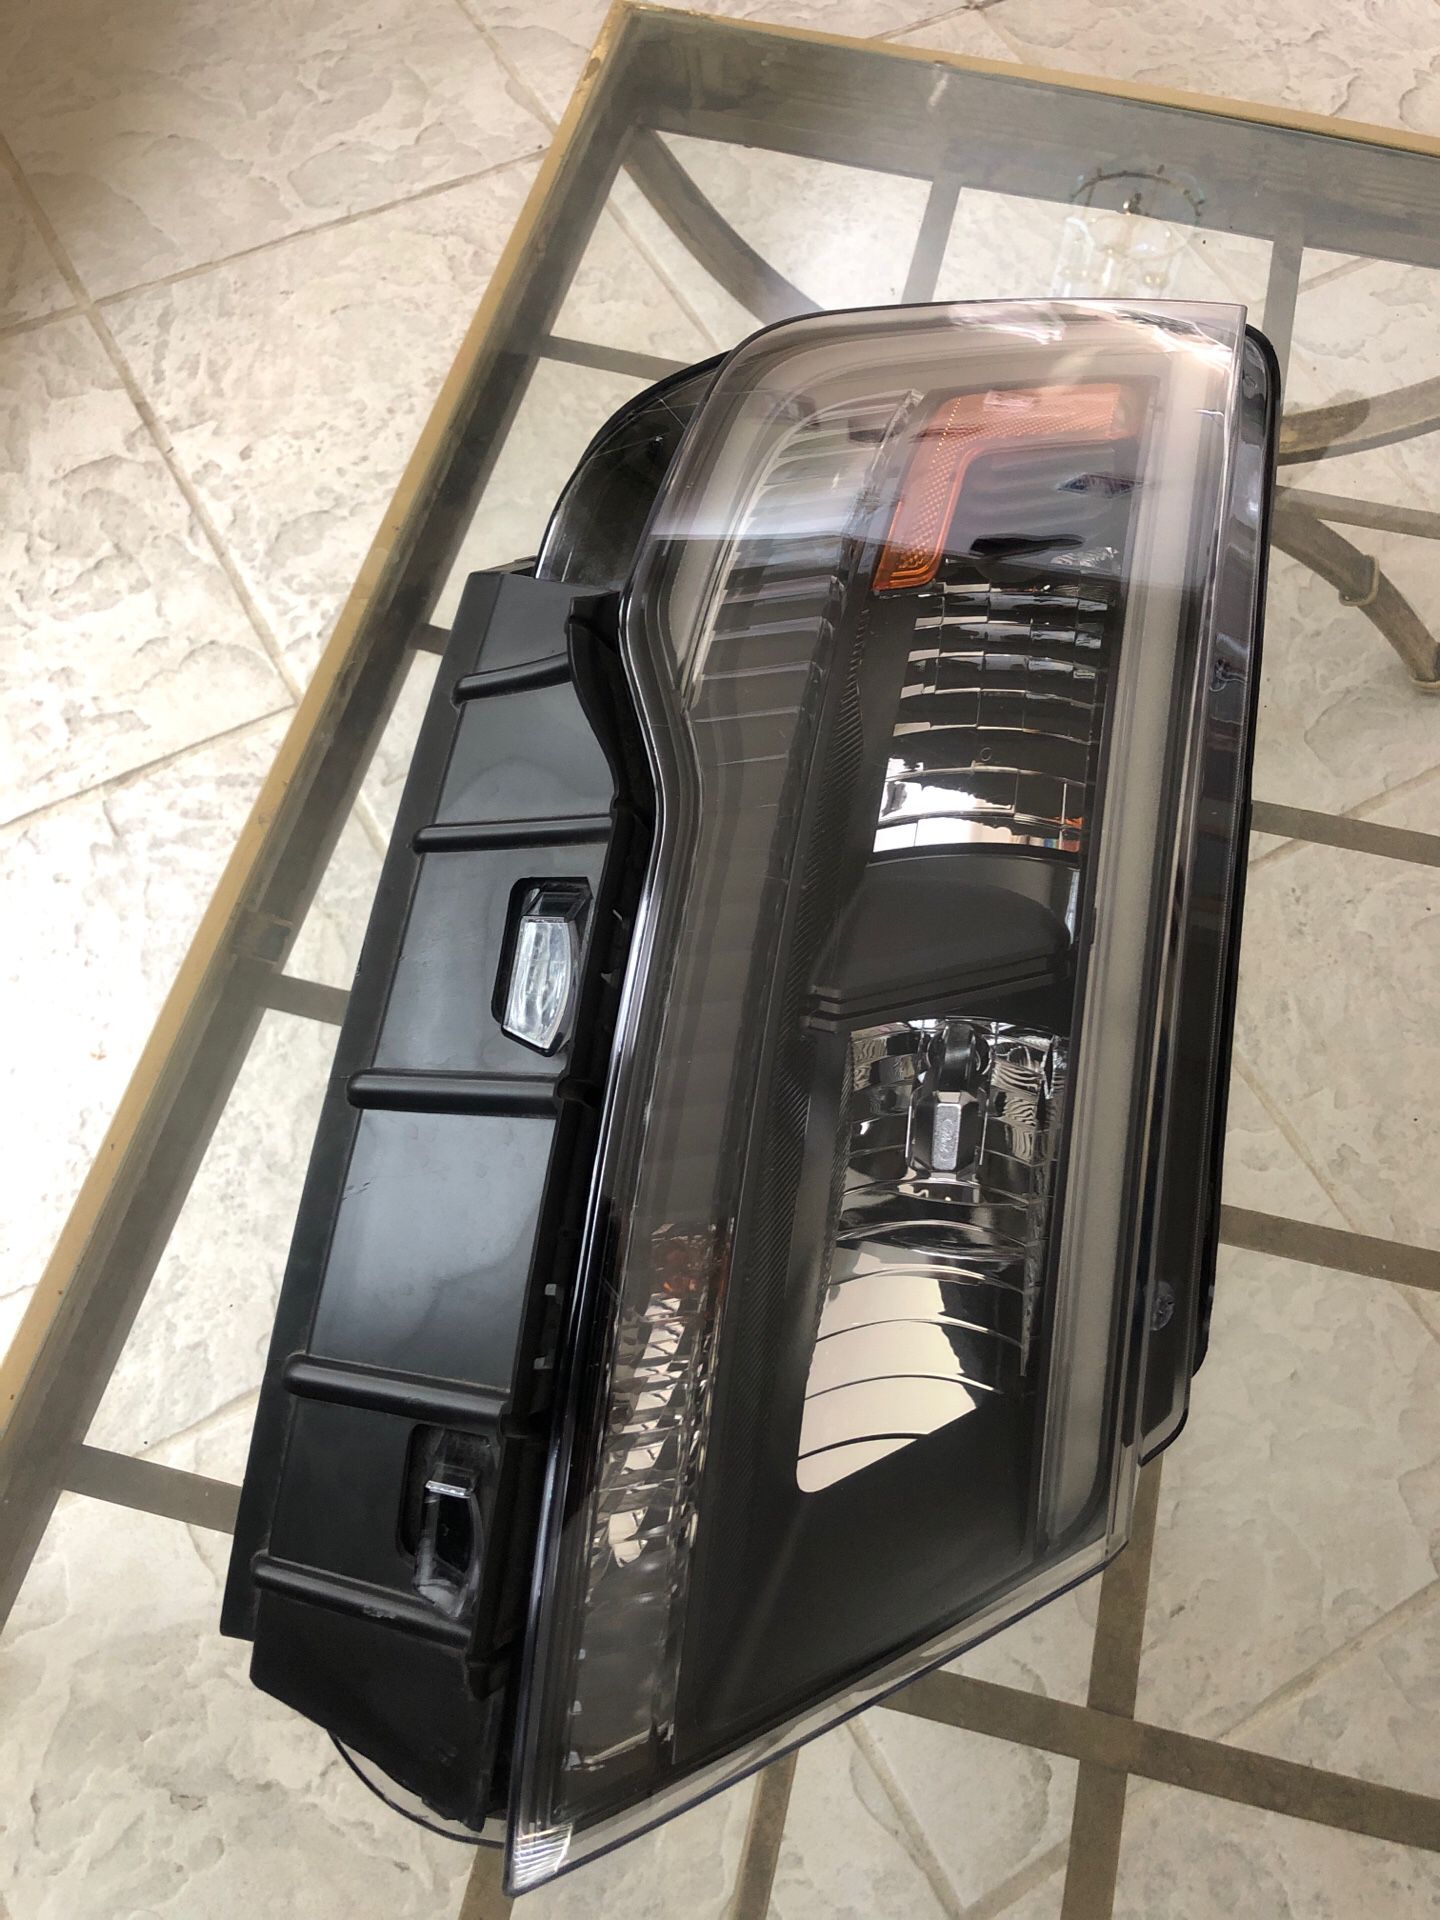 2016 to 2018 right side headlight Ford Explorer oem. $300